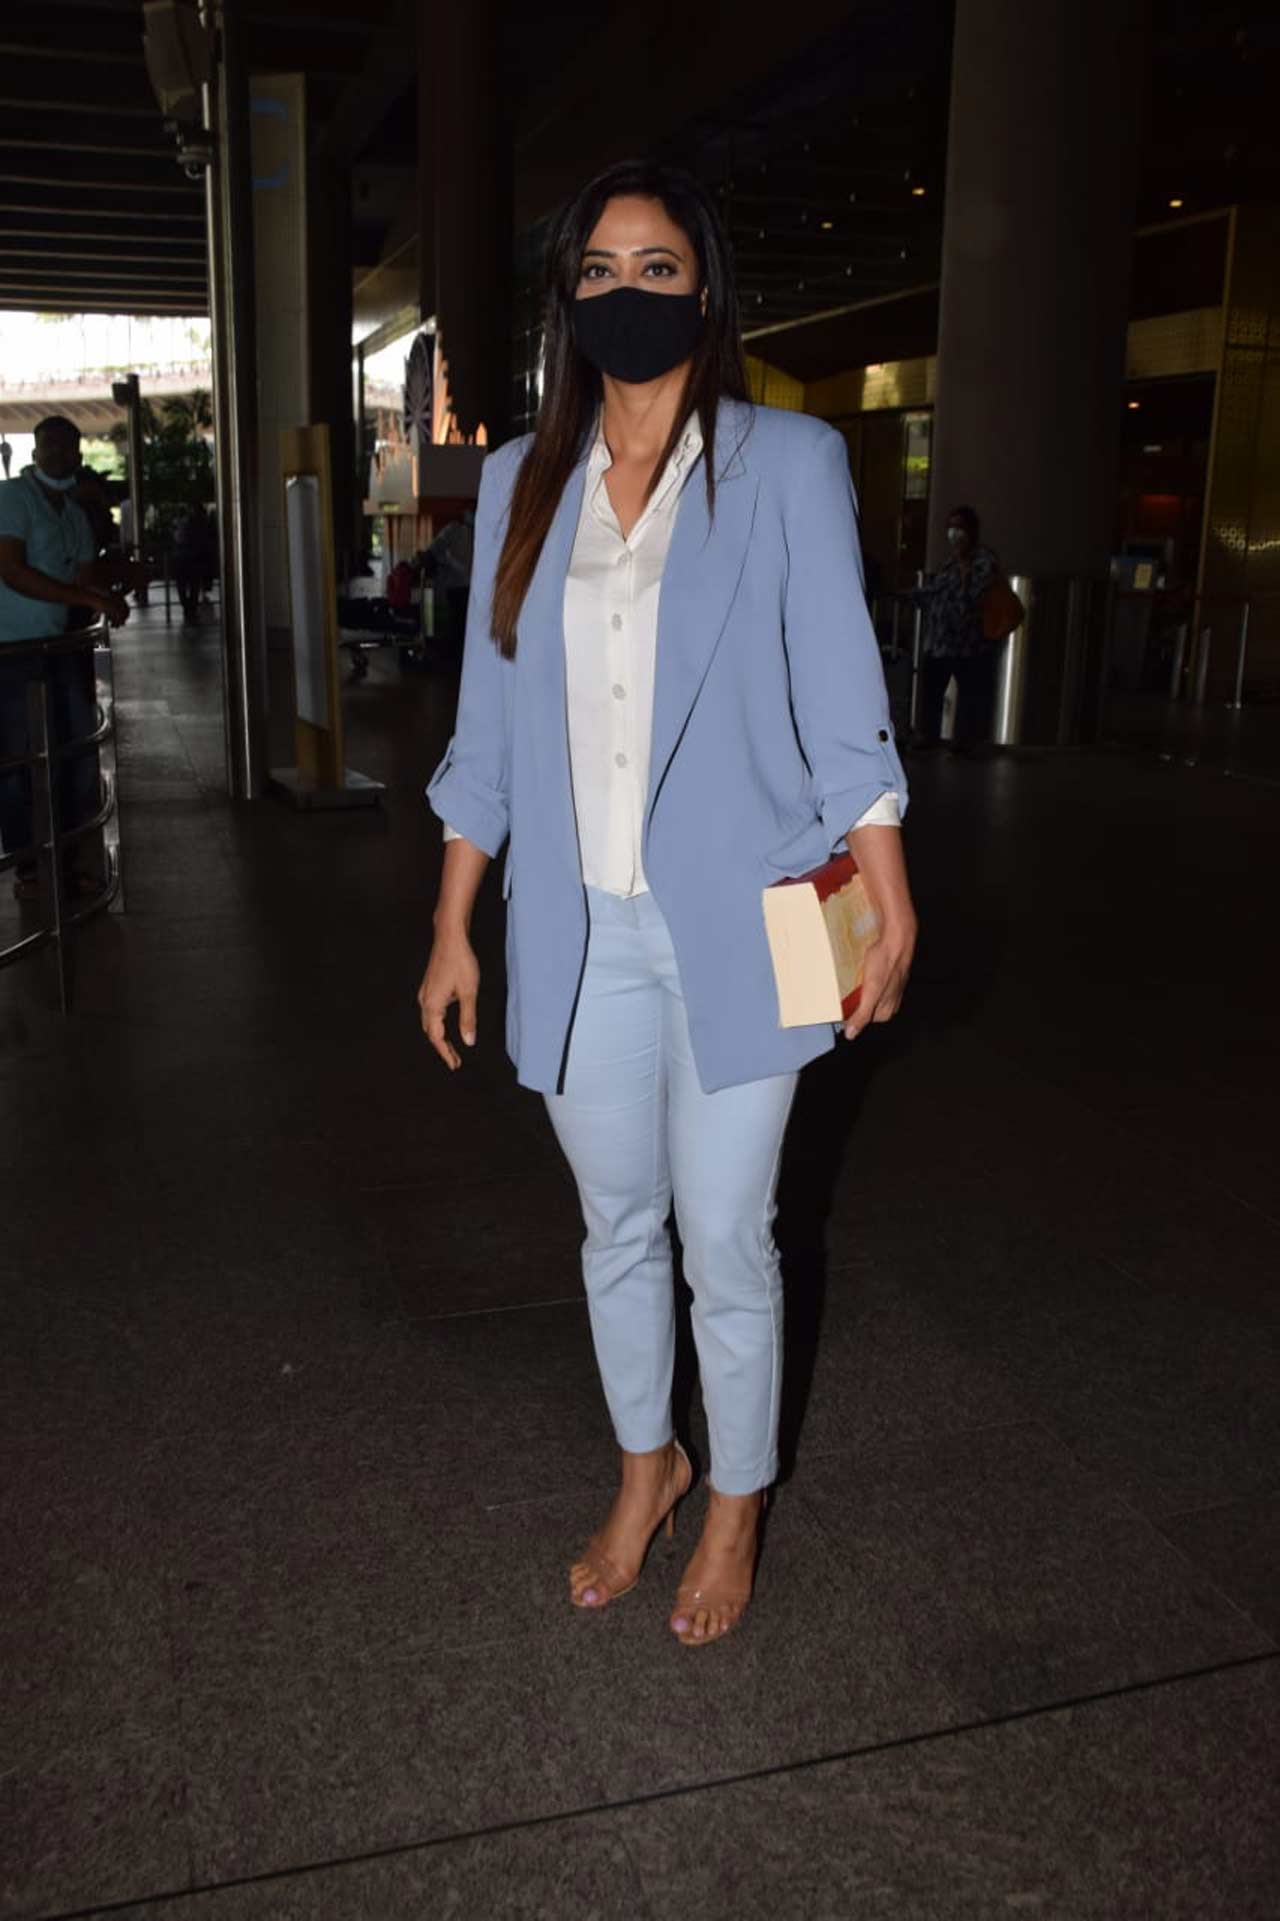 Shweta Tiwari sported a casual suit as her airport look. The pastel blue colour looked like a perfect fit for her morning outing. What do you guys think? On the work front, Shweta is currently a part of a popular reality show - Khatron Ke Khiladi 11.